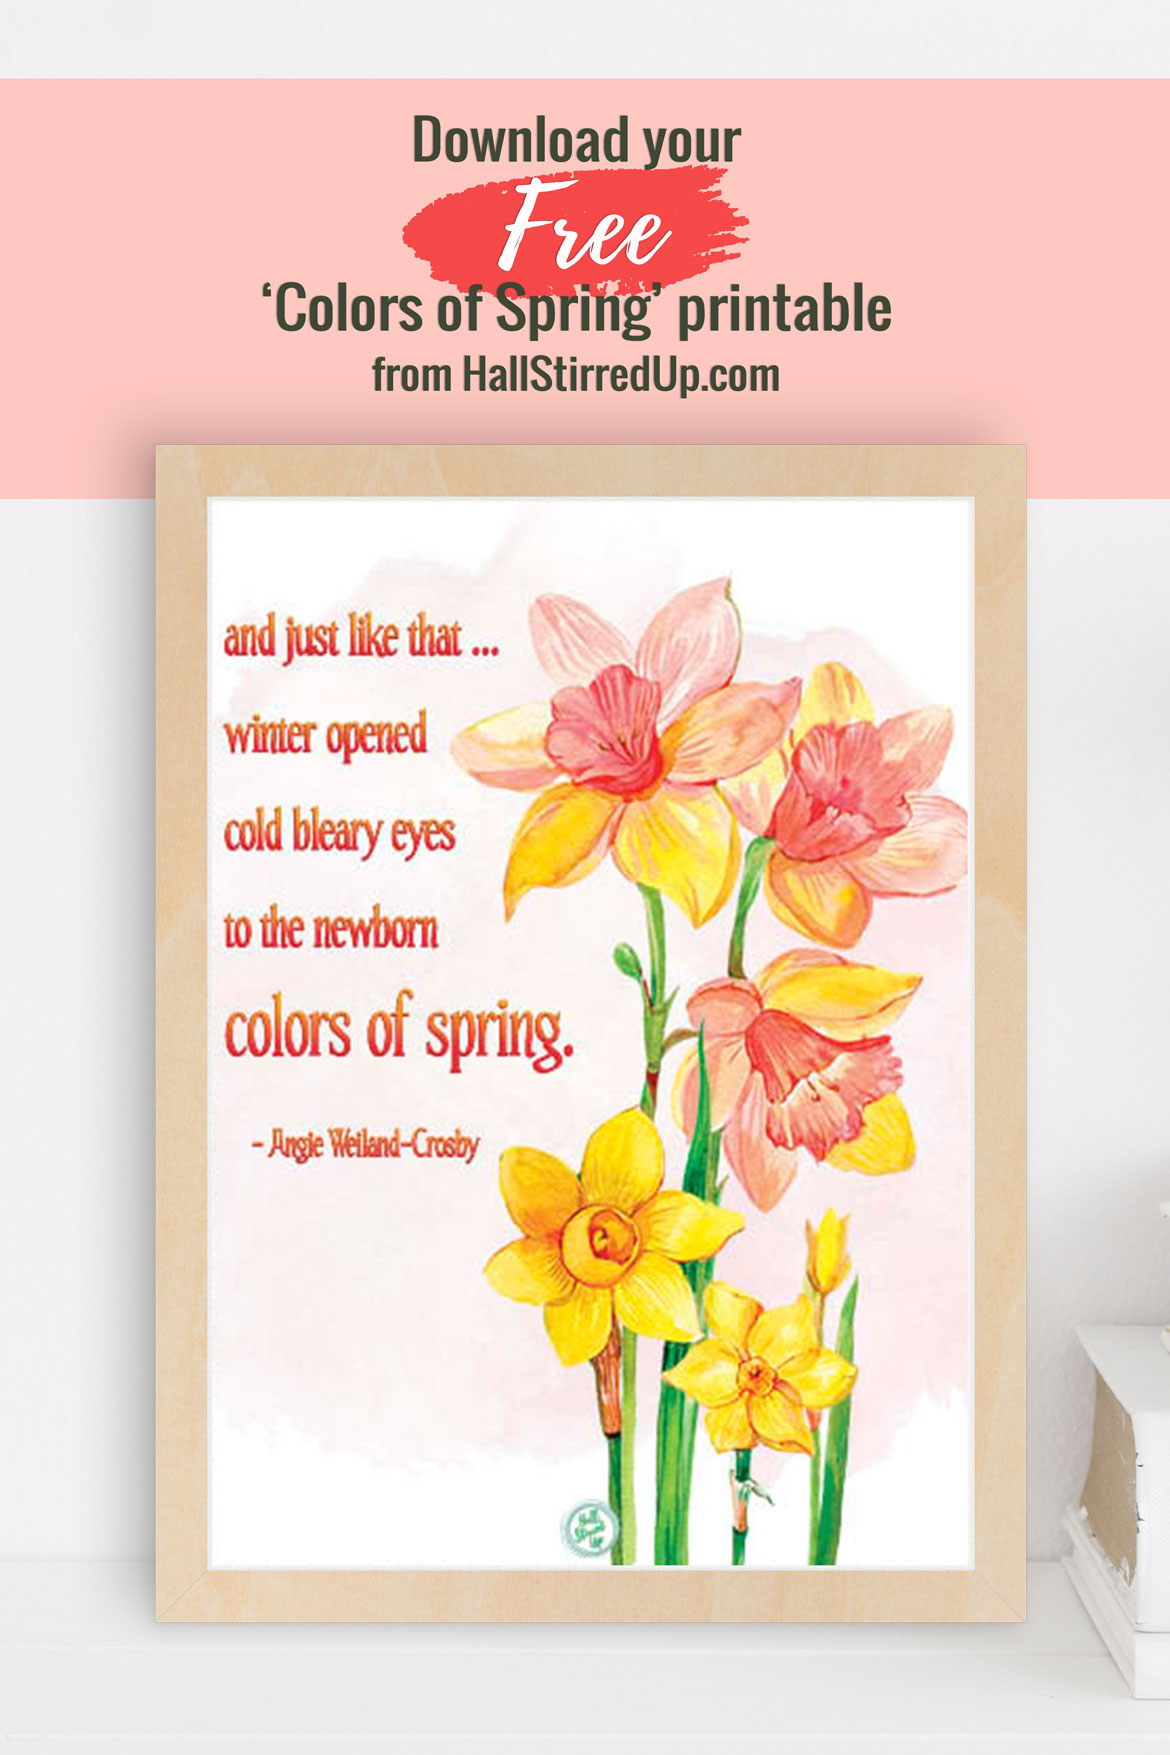 Let's celebrate the colors of spring Download a free printable